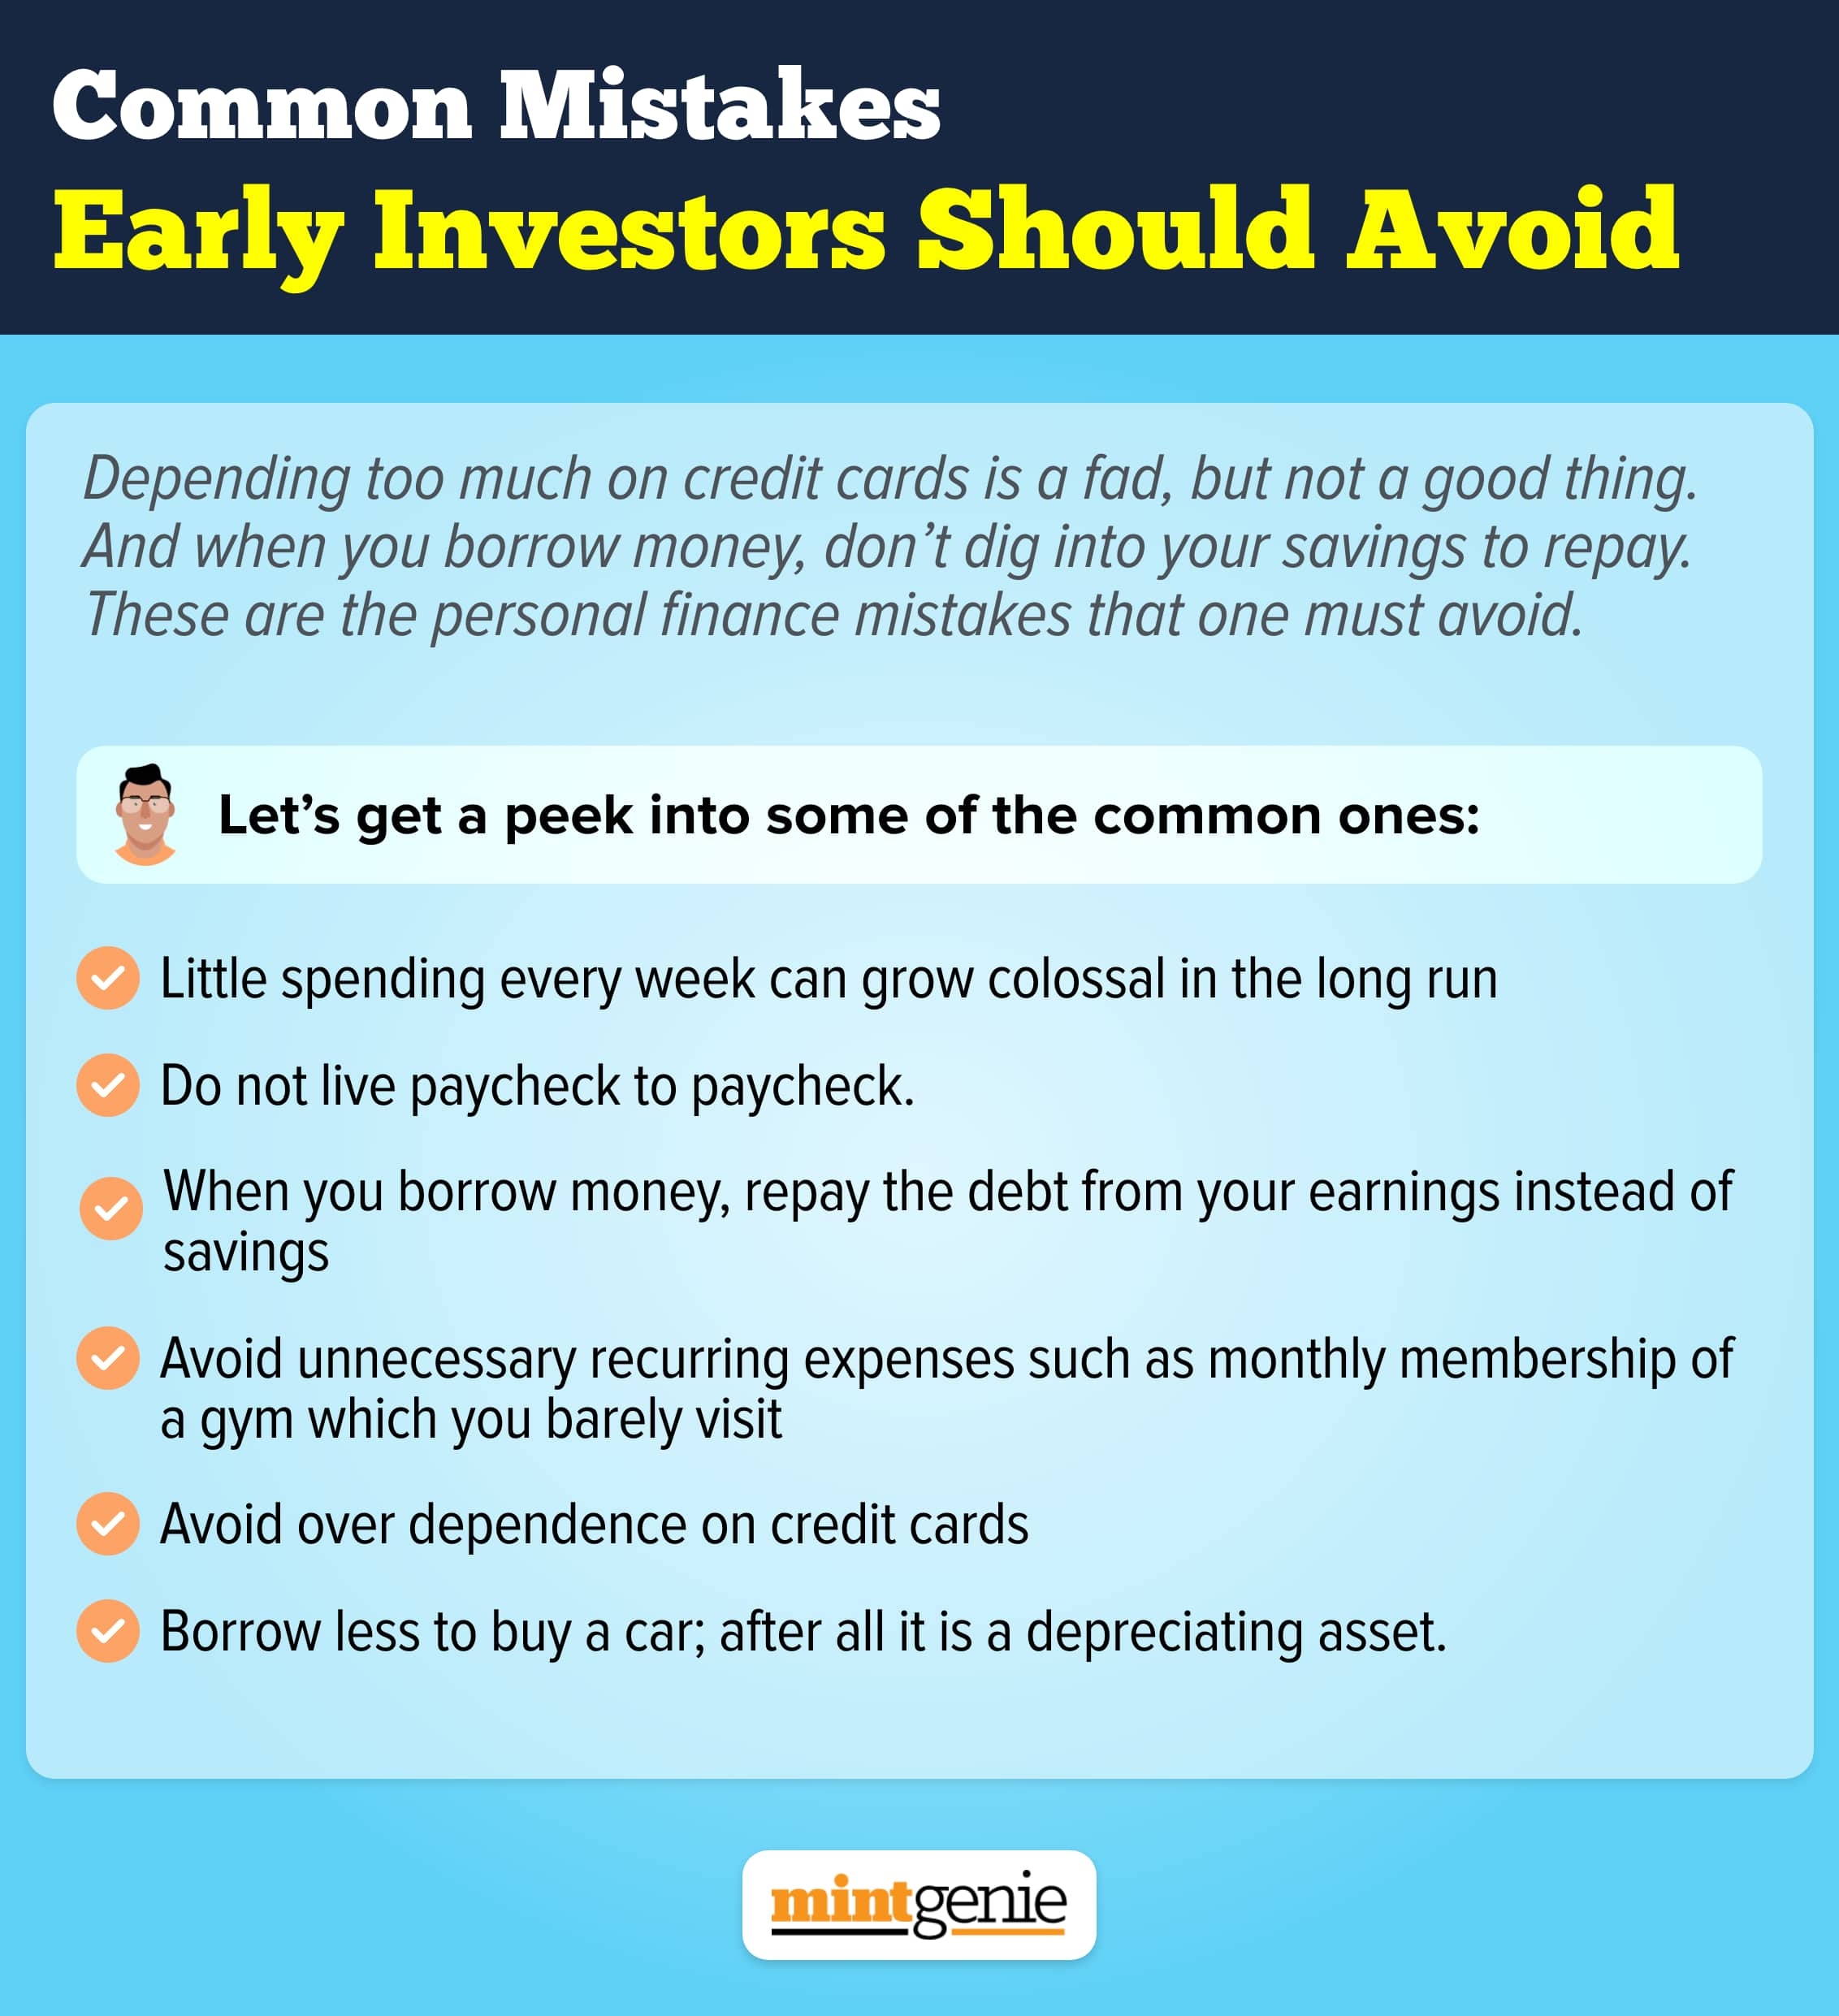 These are the common mistakes which early investors should avoid. 